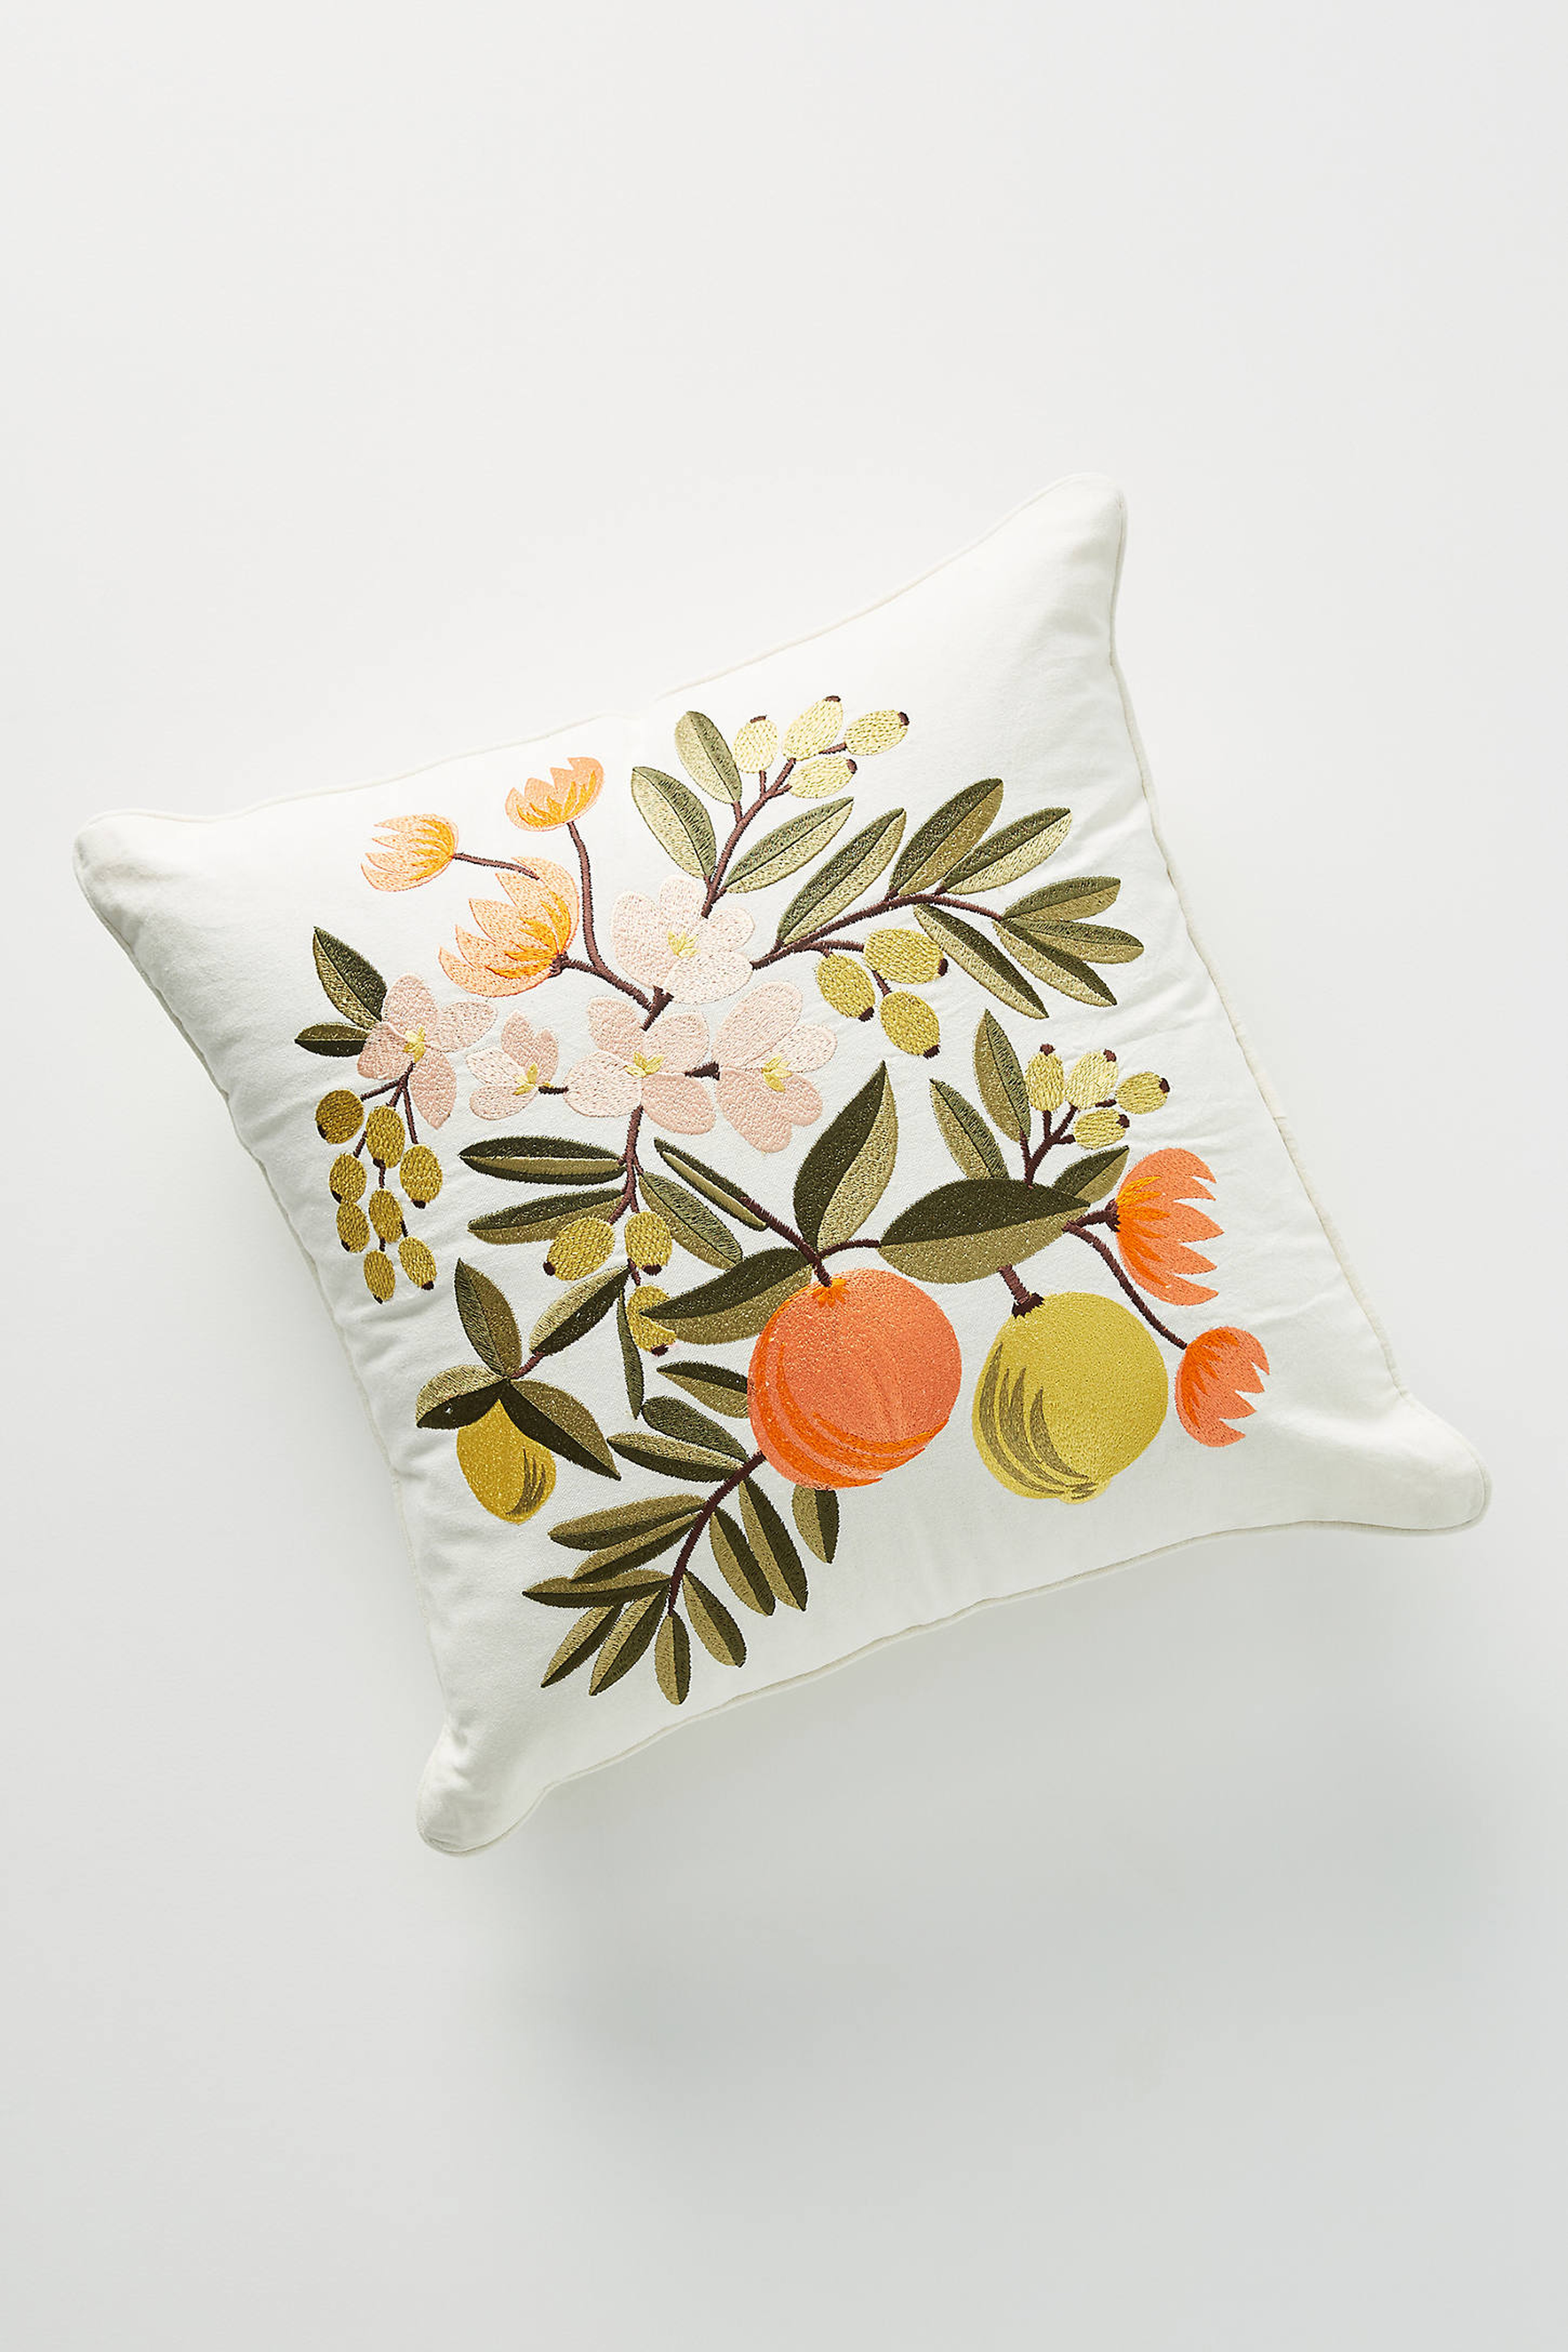 Rifle Paper Co. x Loloi Citrus Floral Embroidered Pillow - Anthropologie